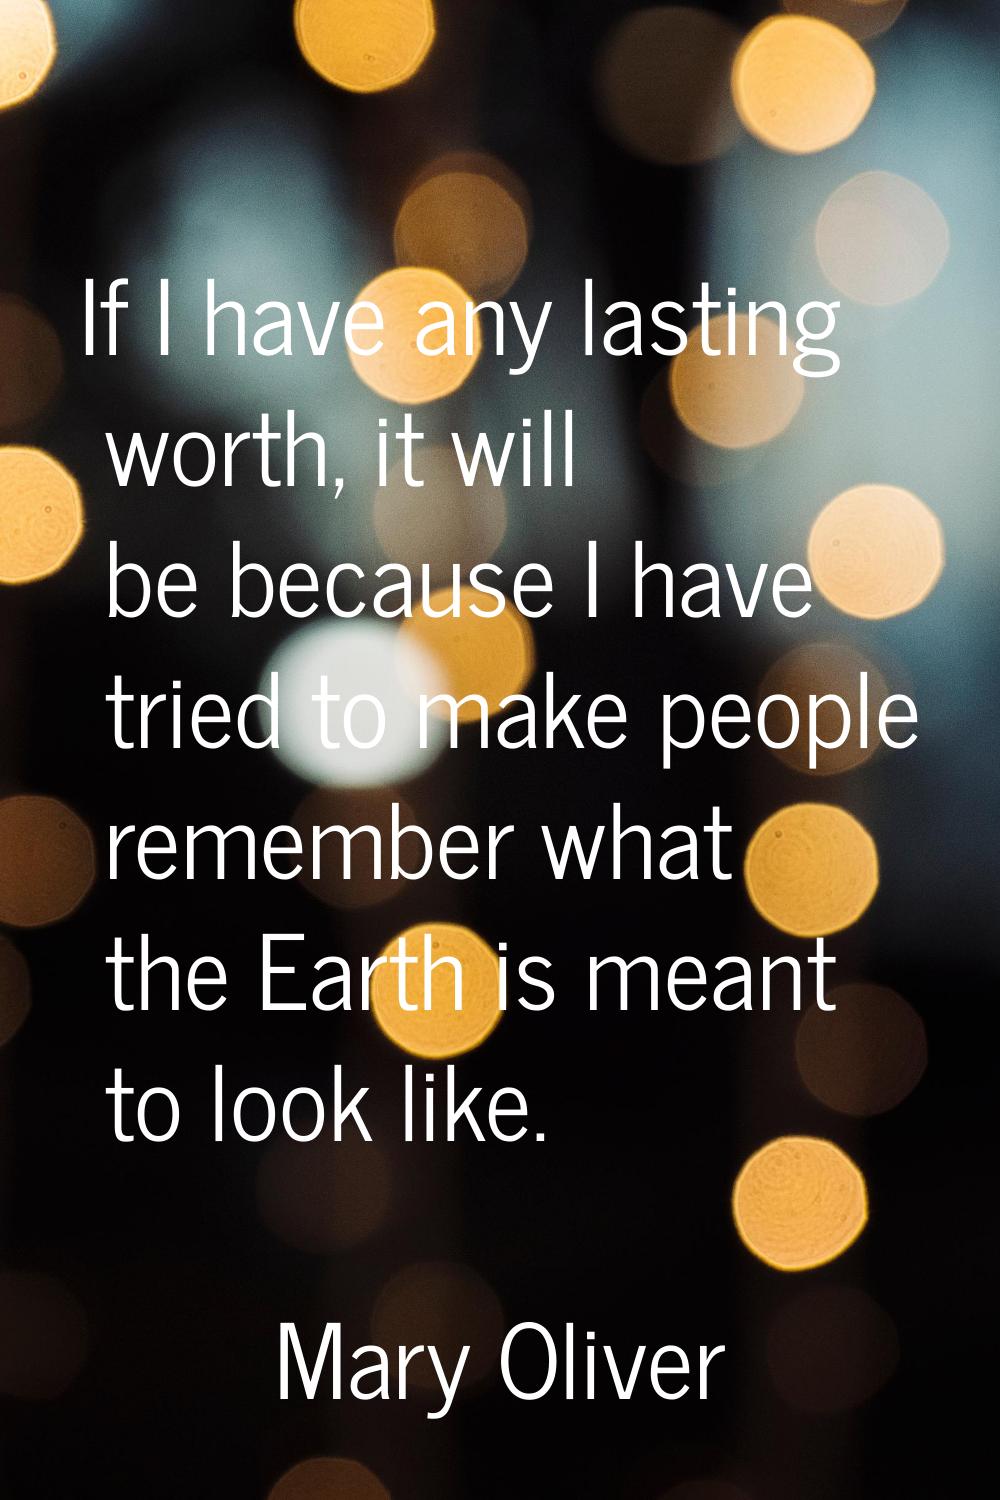 If I have any lasting worth, it will be because I have tried to make people remember what the Earth